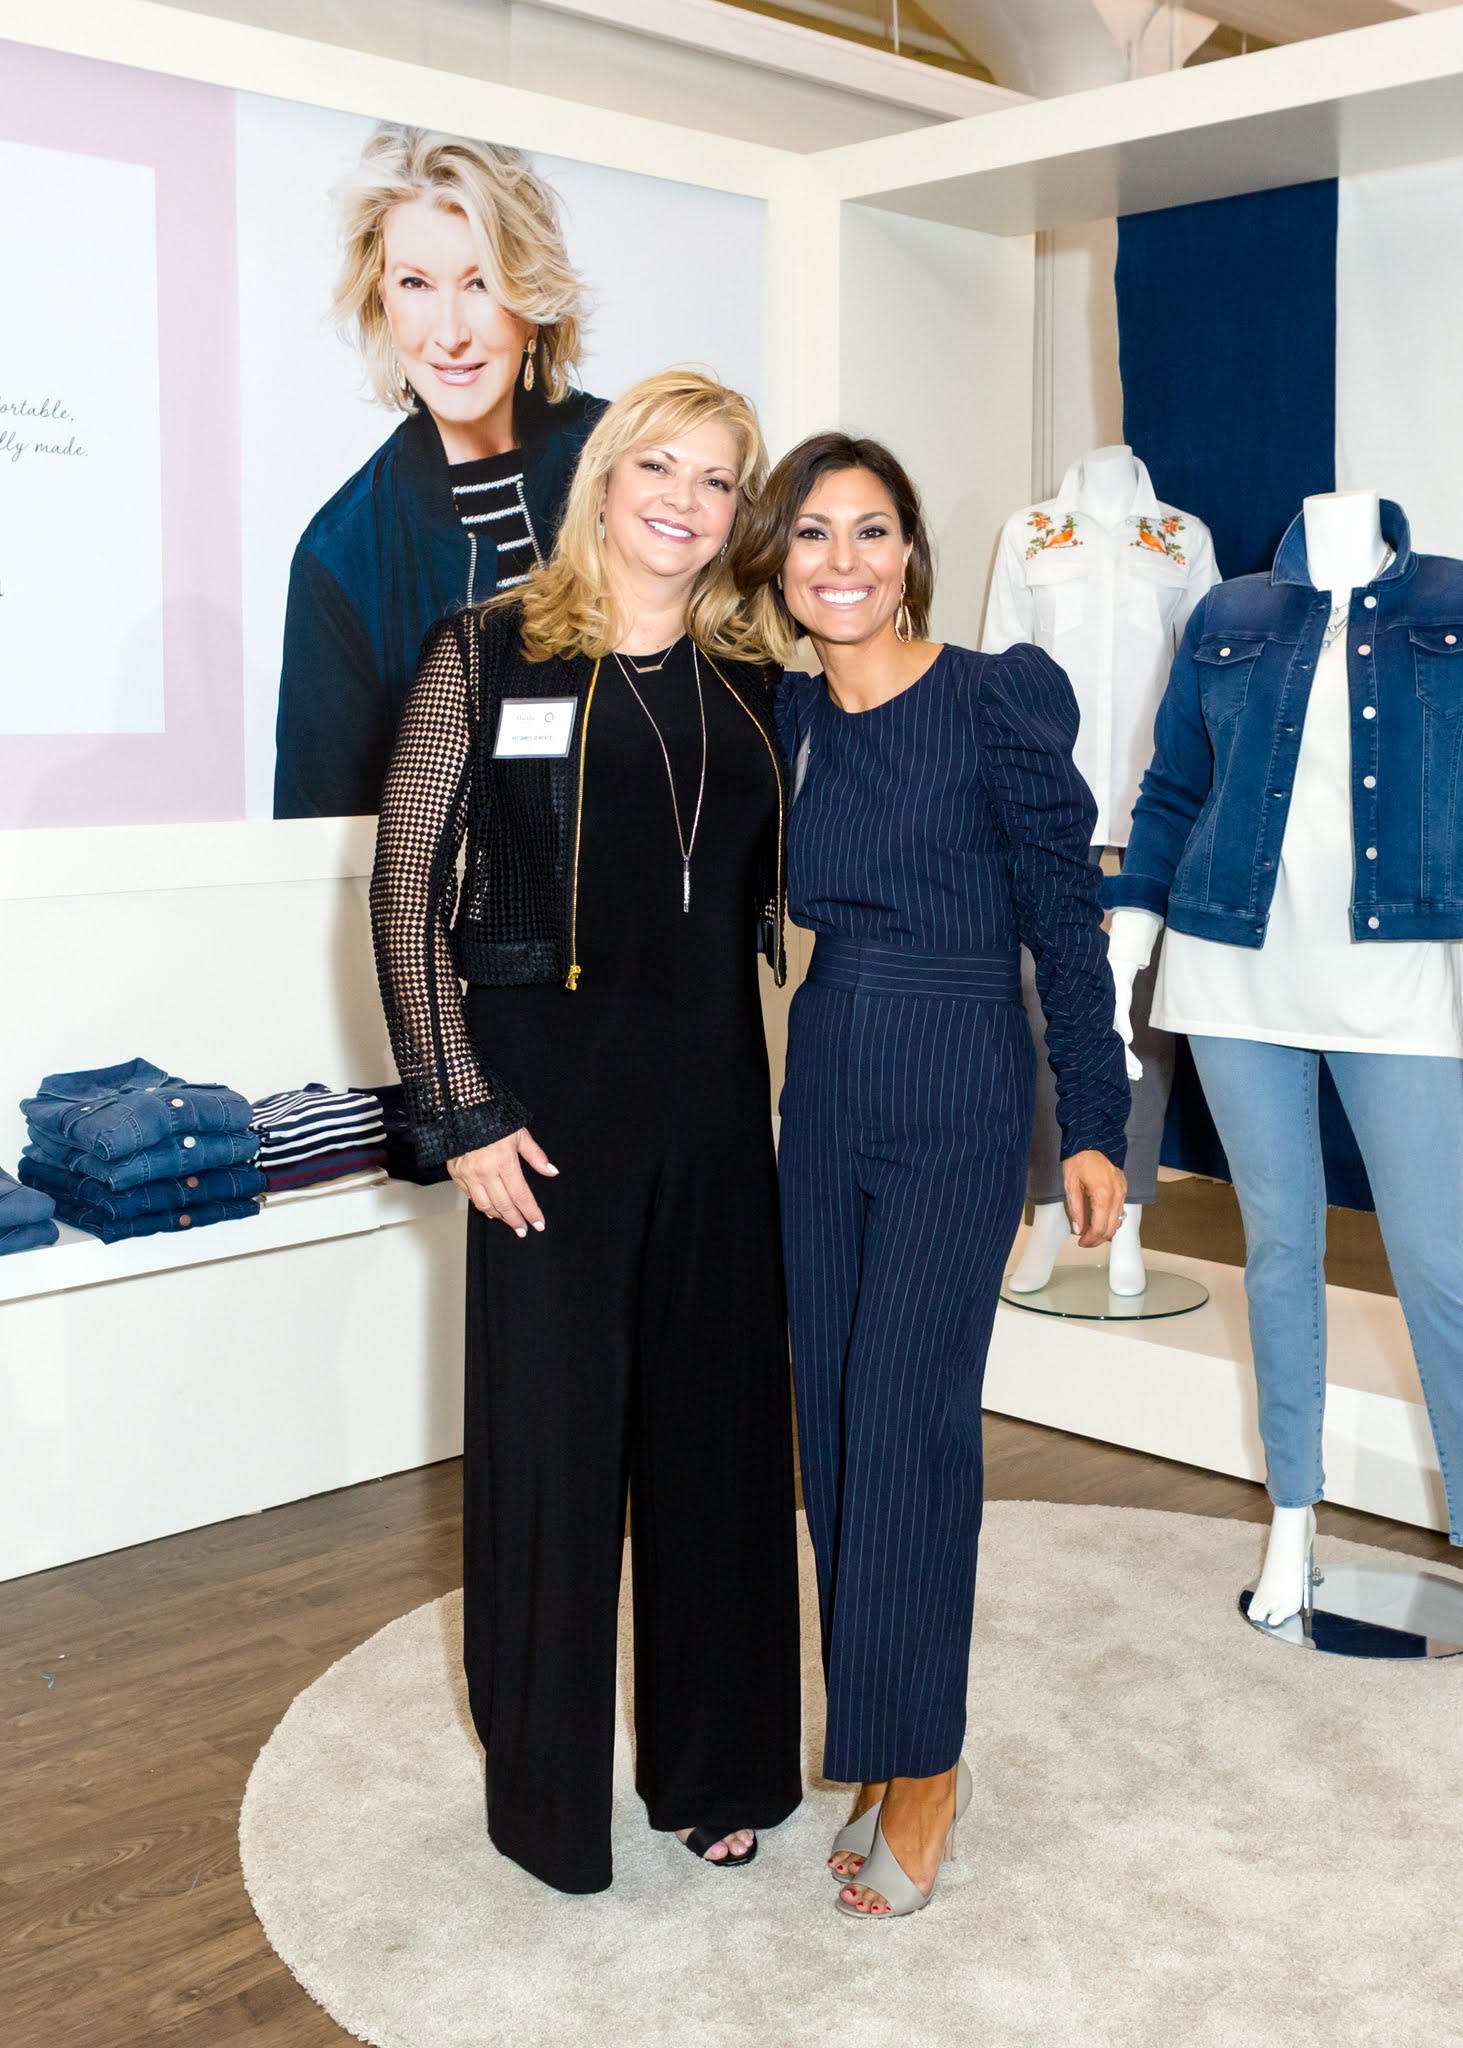 Celebrating My New Collections at QVC - The Martha Stewart Blog